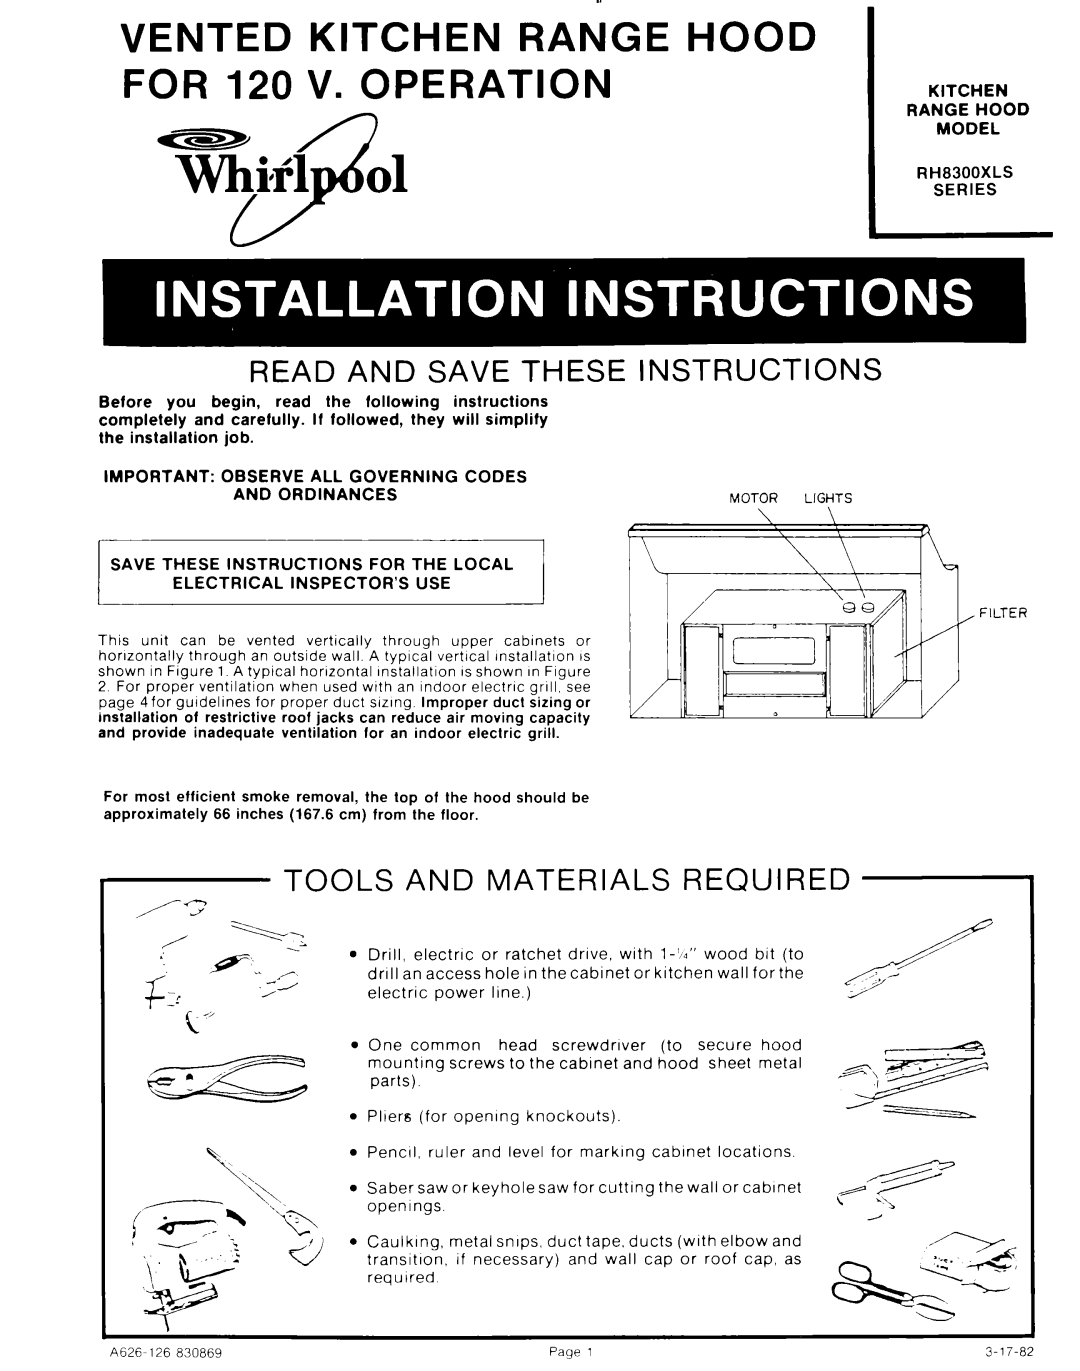 Whirlpool RH8300XLS manual VENTED KITCHEN RANGE HOOD FOR 120 V. OPERATION, Read And Save These, Instructions 